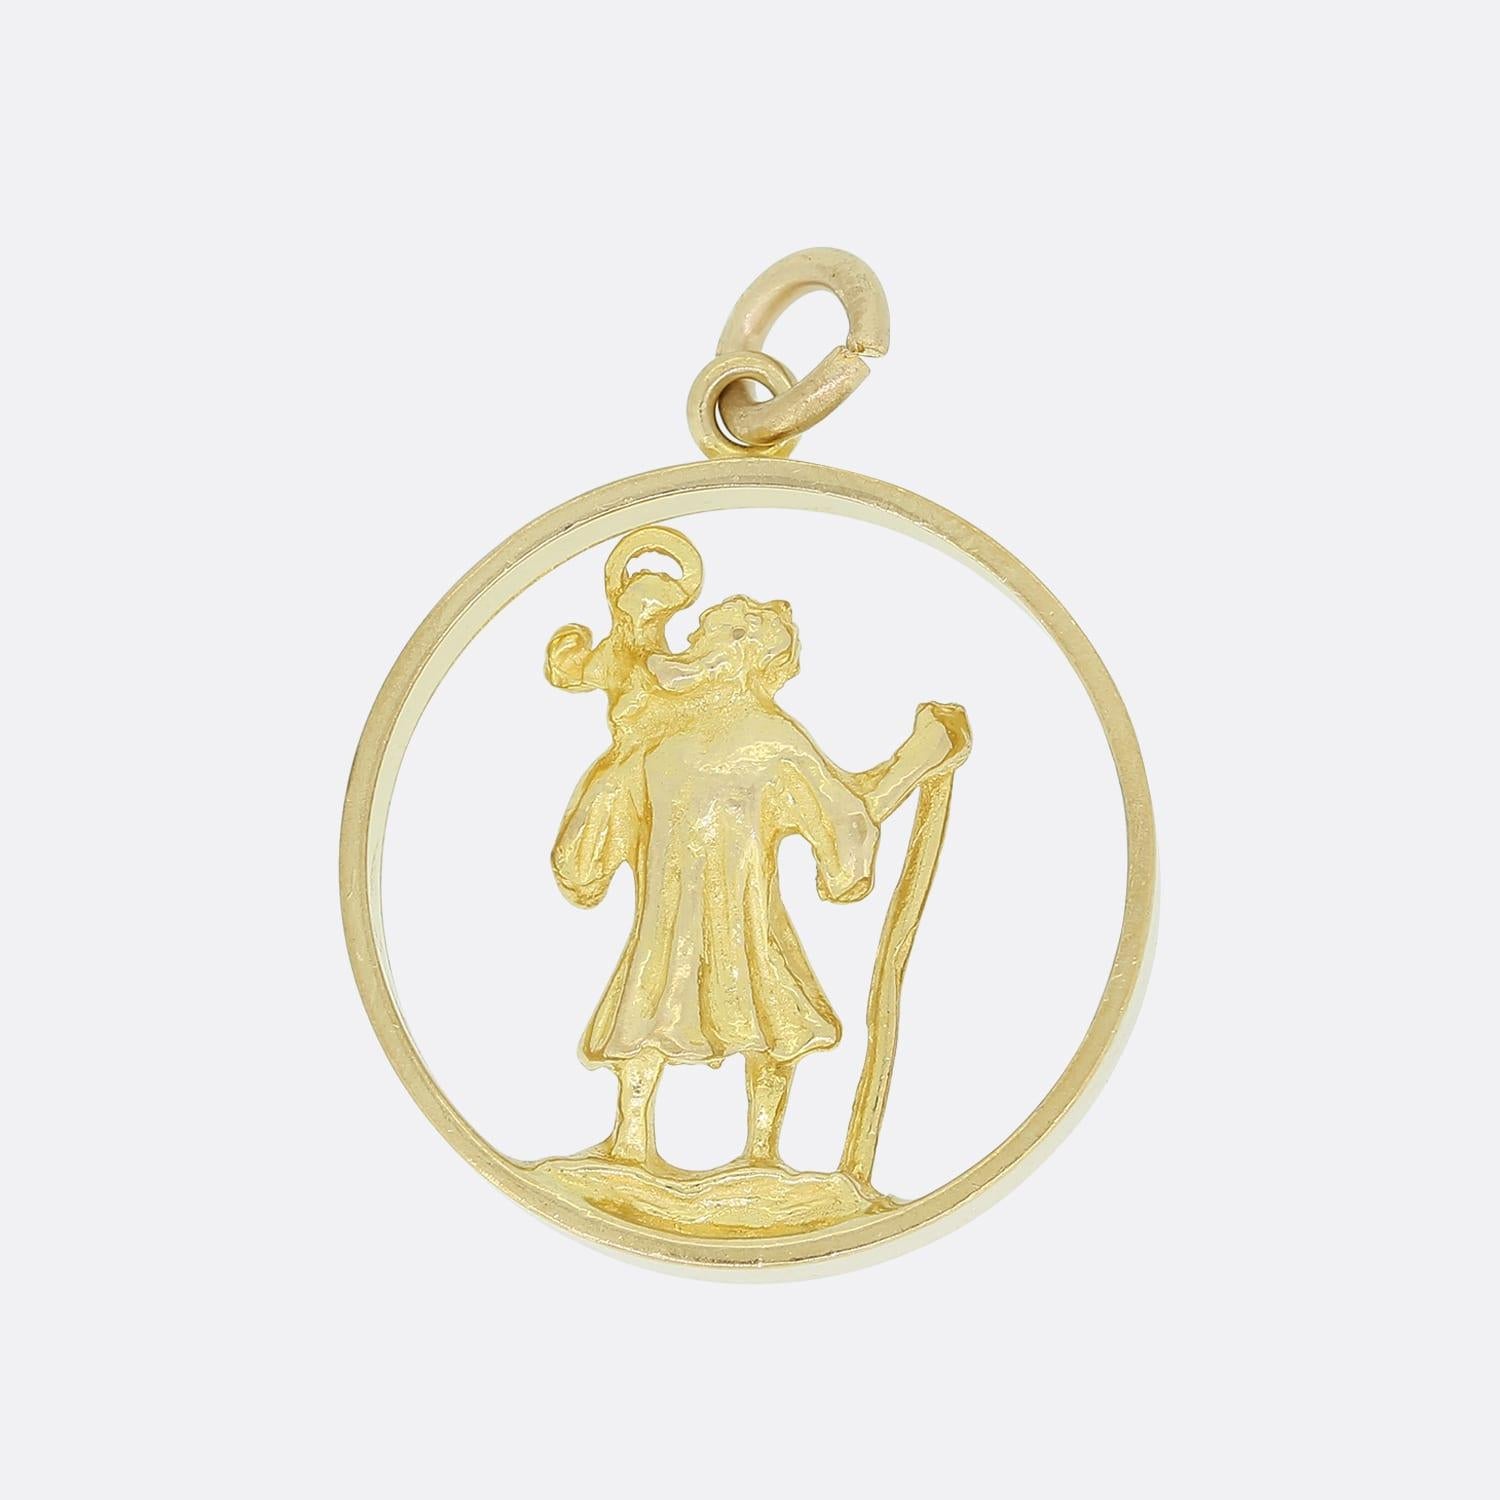 This is a vintage 9ct yellow gold St Christopher pendant. 

Condition: Used (Very Good)
Weight: 5.3 grams
Dimensions: 23mm x 23mm x 4mm
Hallmarked: Yes, Birmingham 1977
Period: Vintage
Box: Plain Gift Box